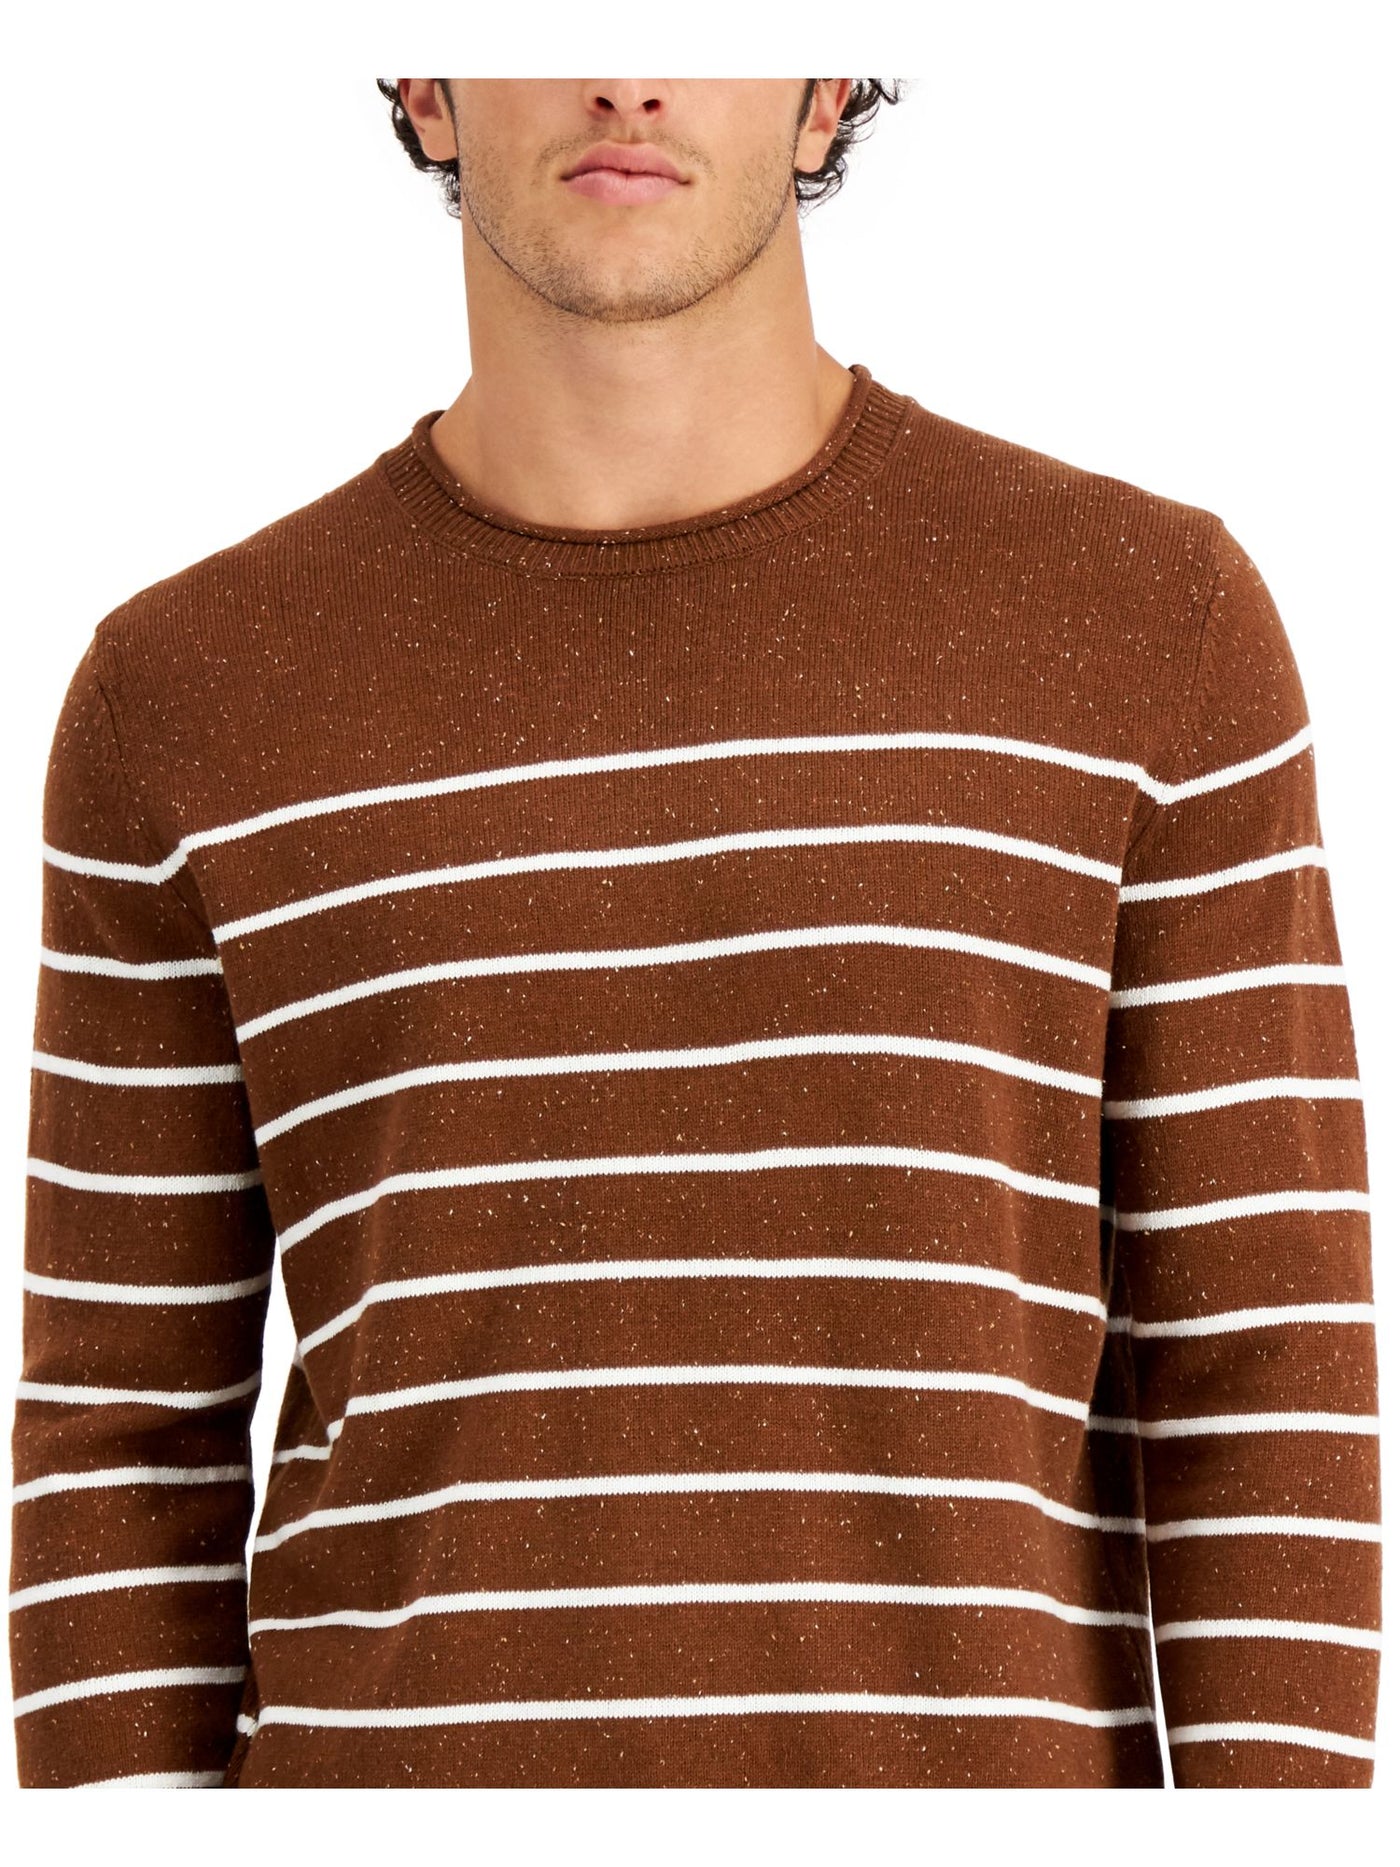 CLUBROOM Mens Gregor Brown Striped Crew Neck Classic Fit Pullover Sweater XL